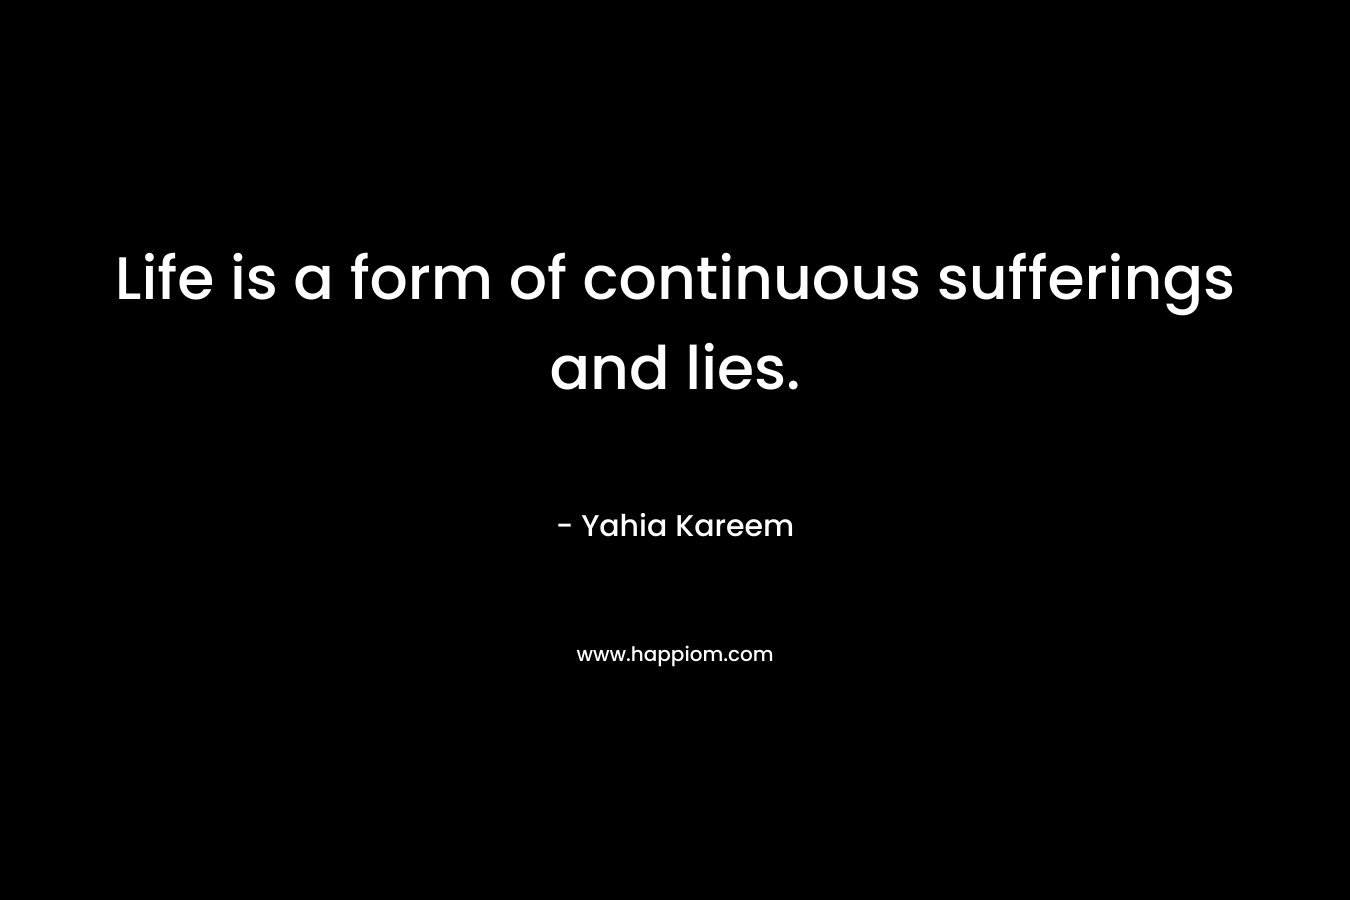 Life is a form of continuous sufferings and lies. – Yahia Kareem